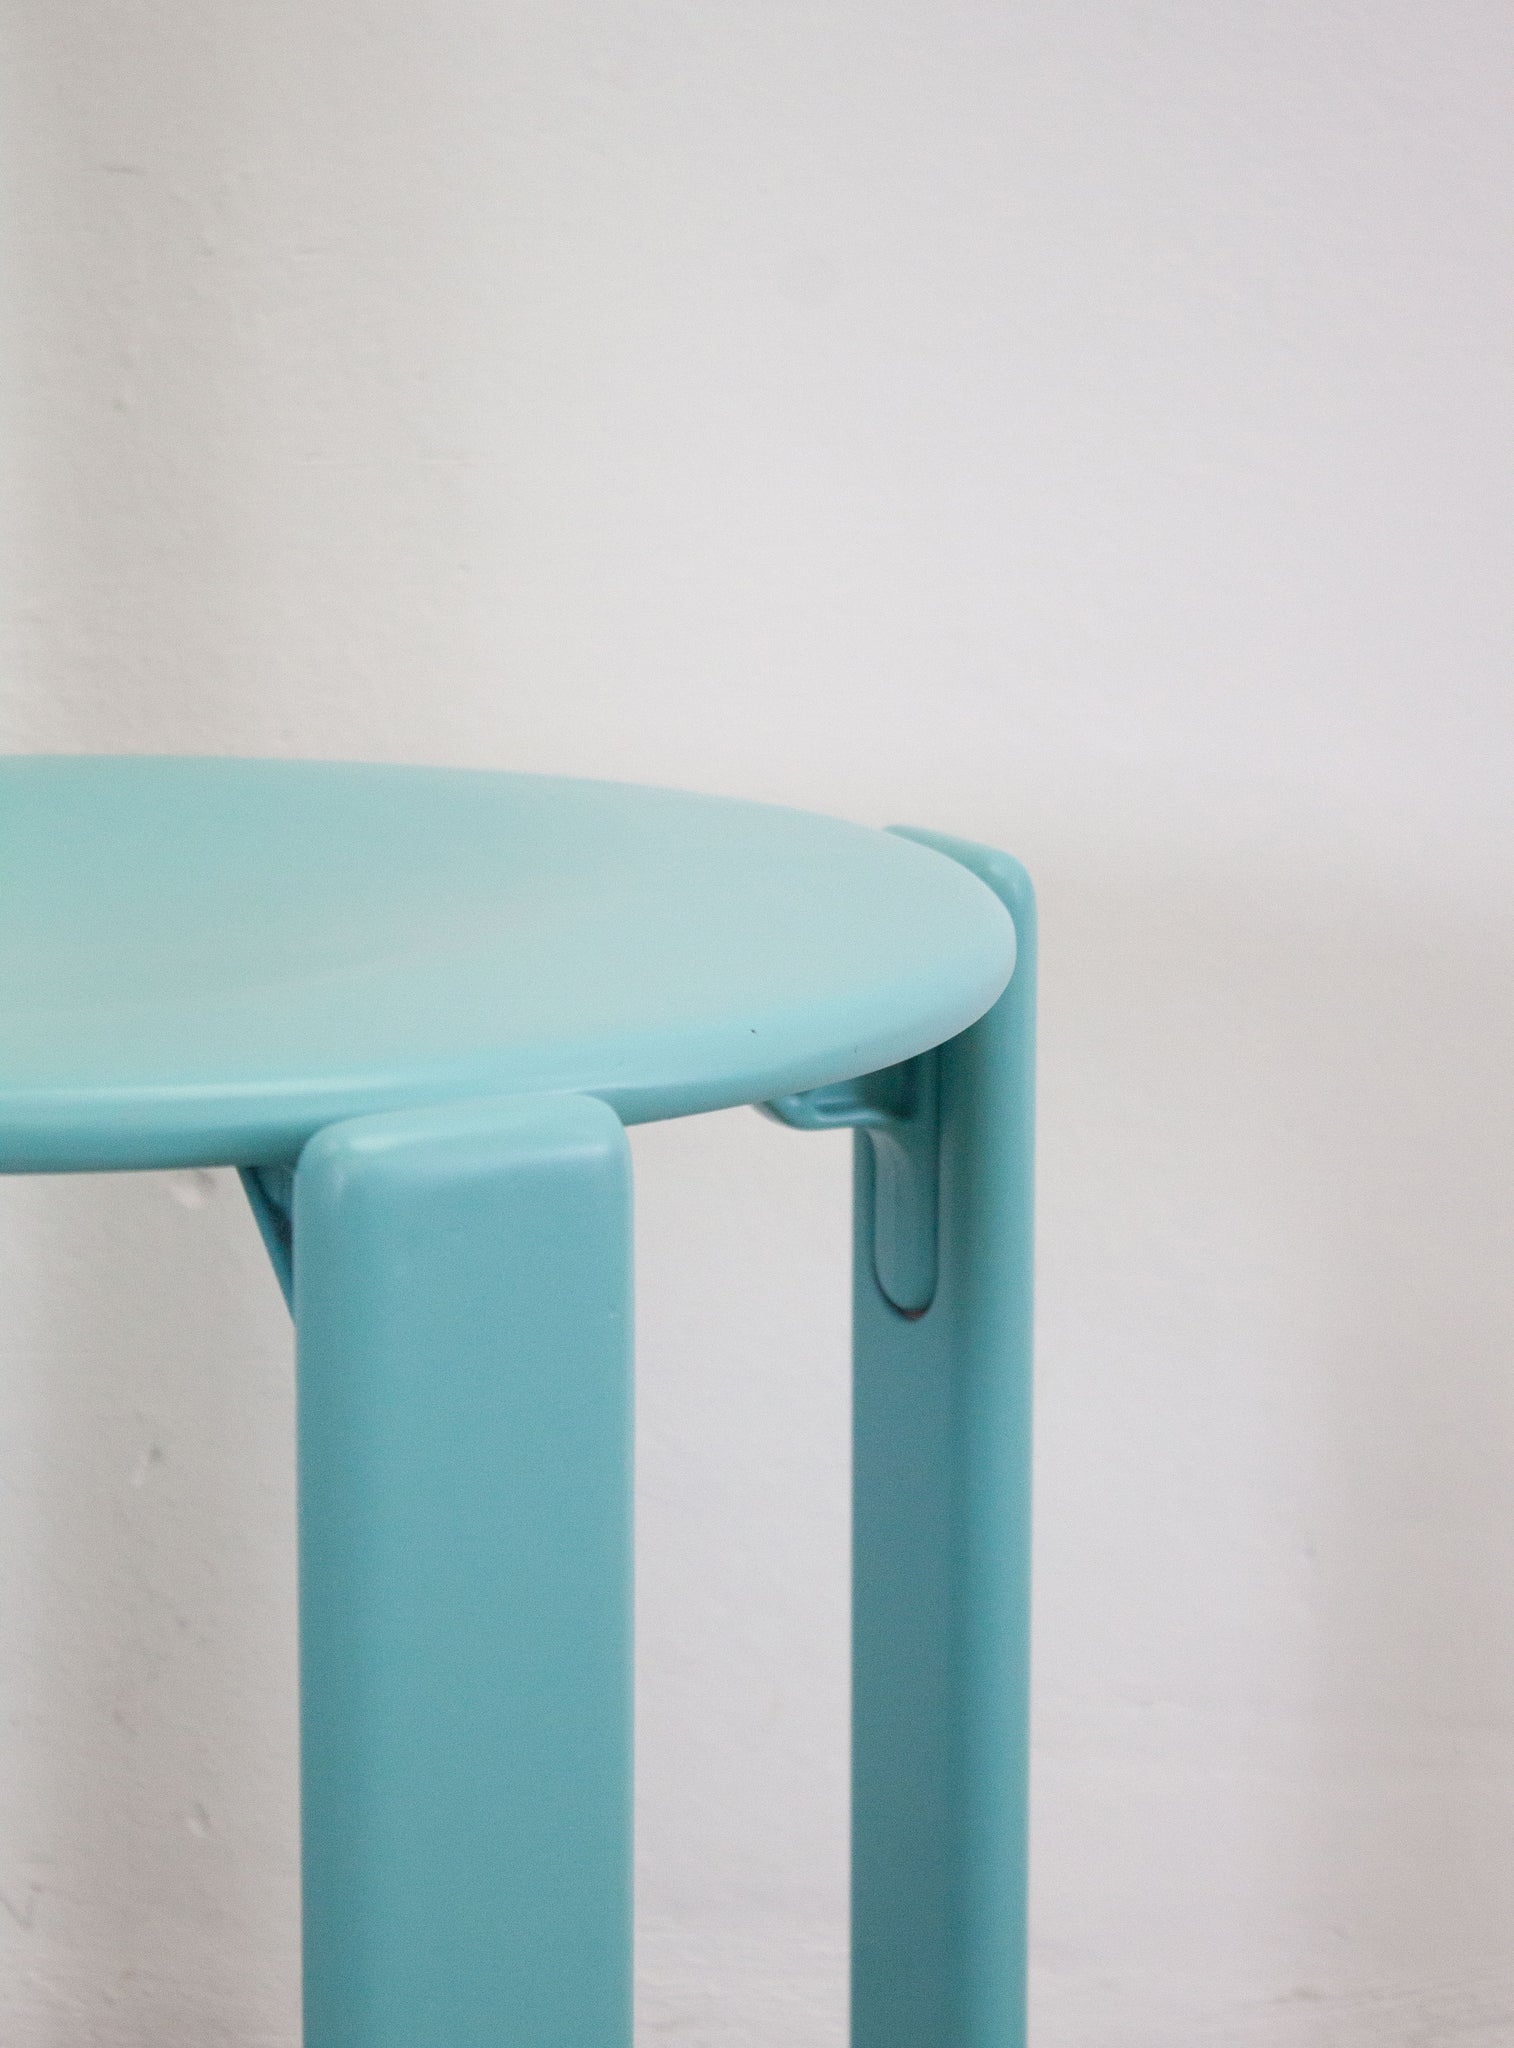 Dietiker Rey Dining Chairs by Bruno Rey (Light Teal Green)